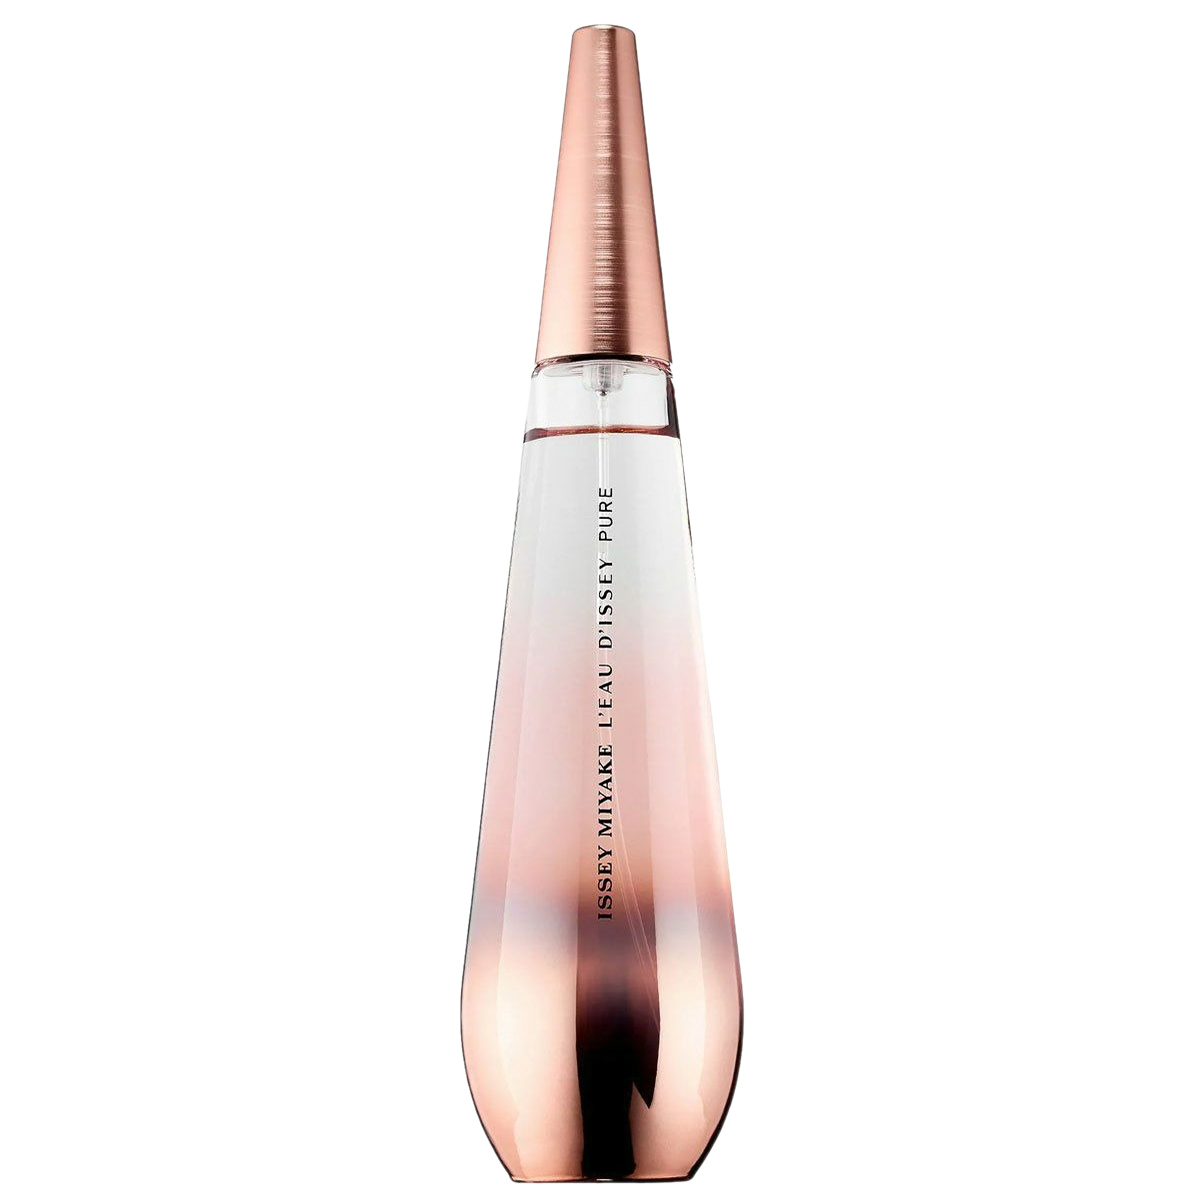 Issey Miyake L'Eau d'Issey Pure Nectar EDP